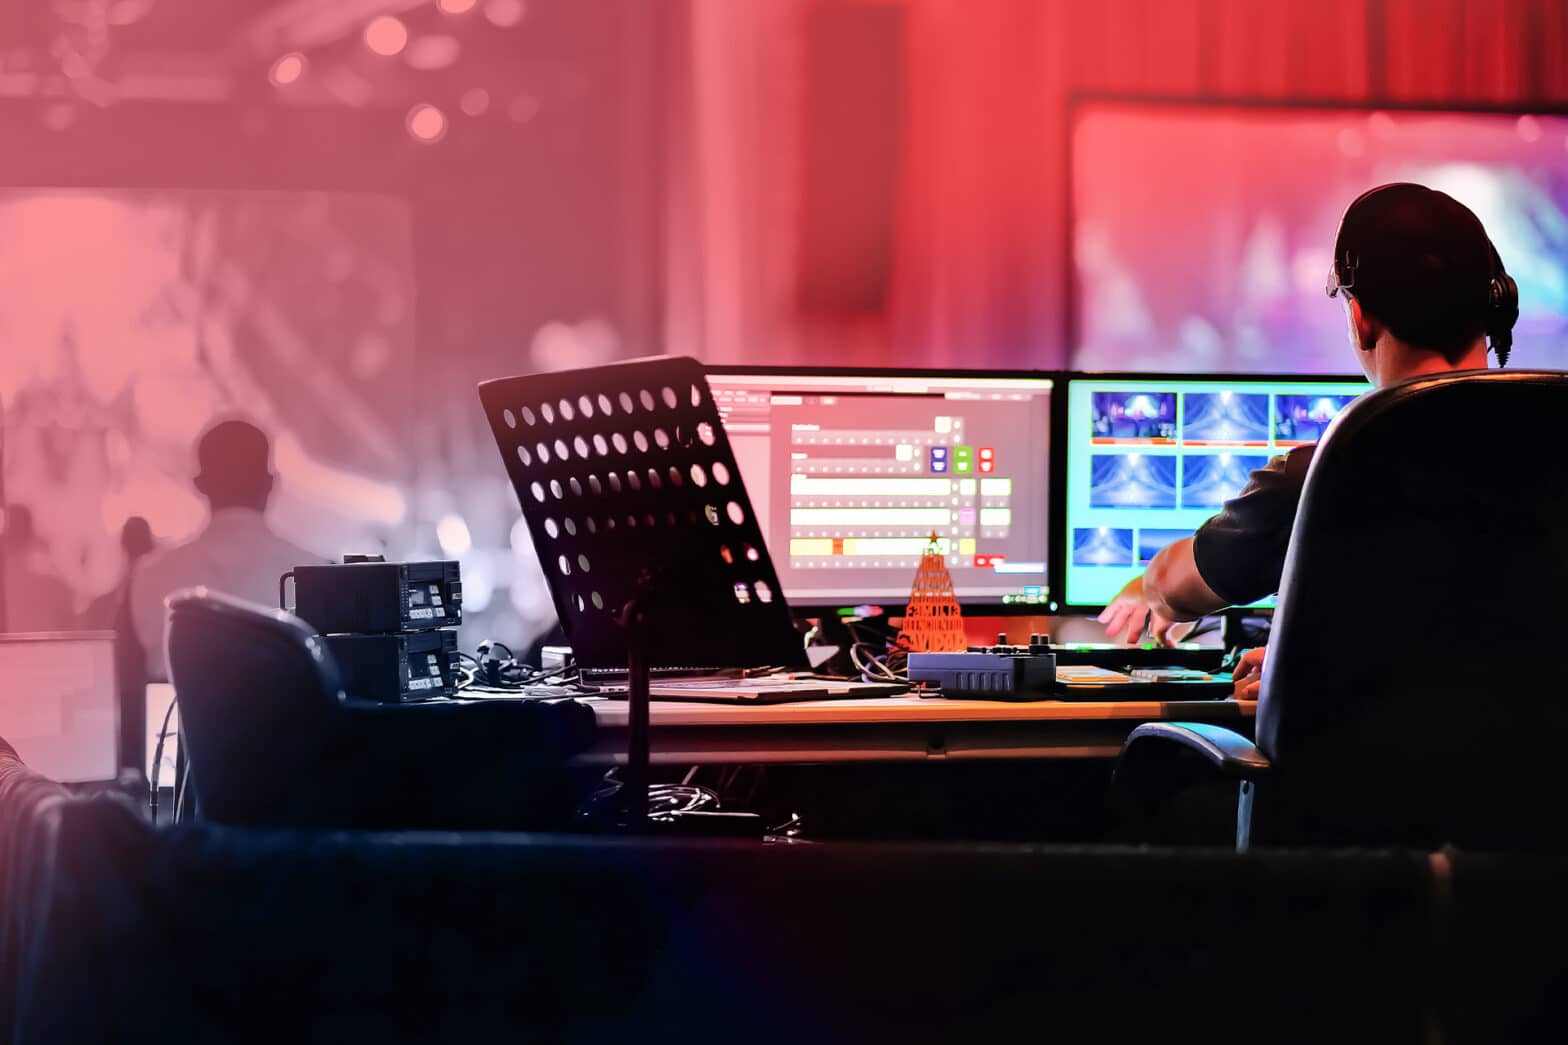 Discover the top 3 reasons your church should livestream church services over the holidays!